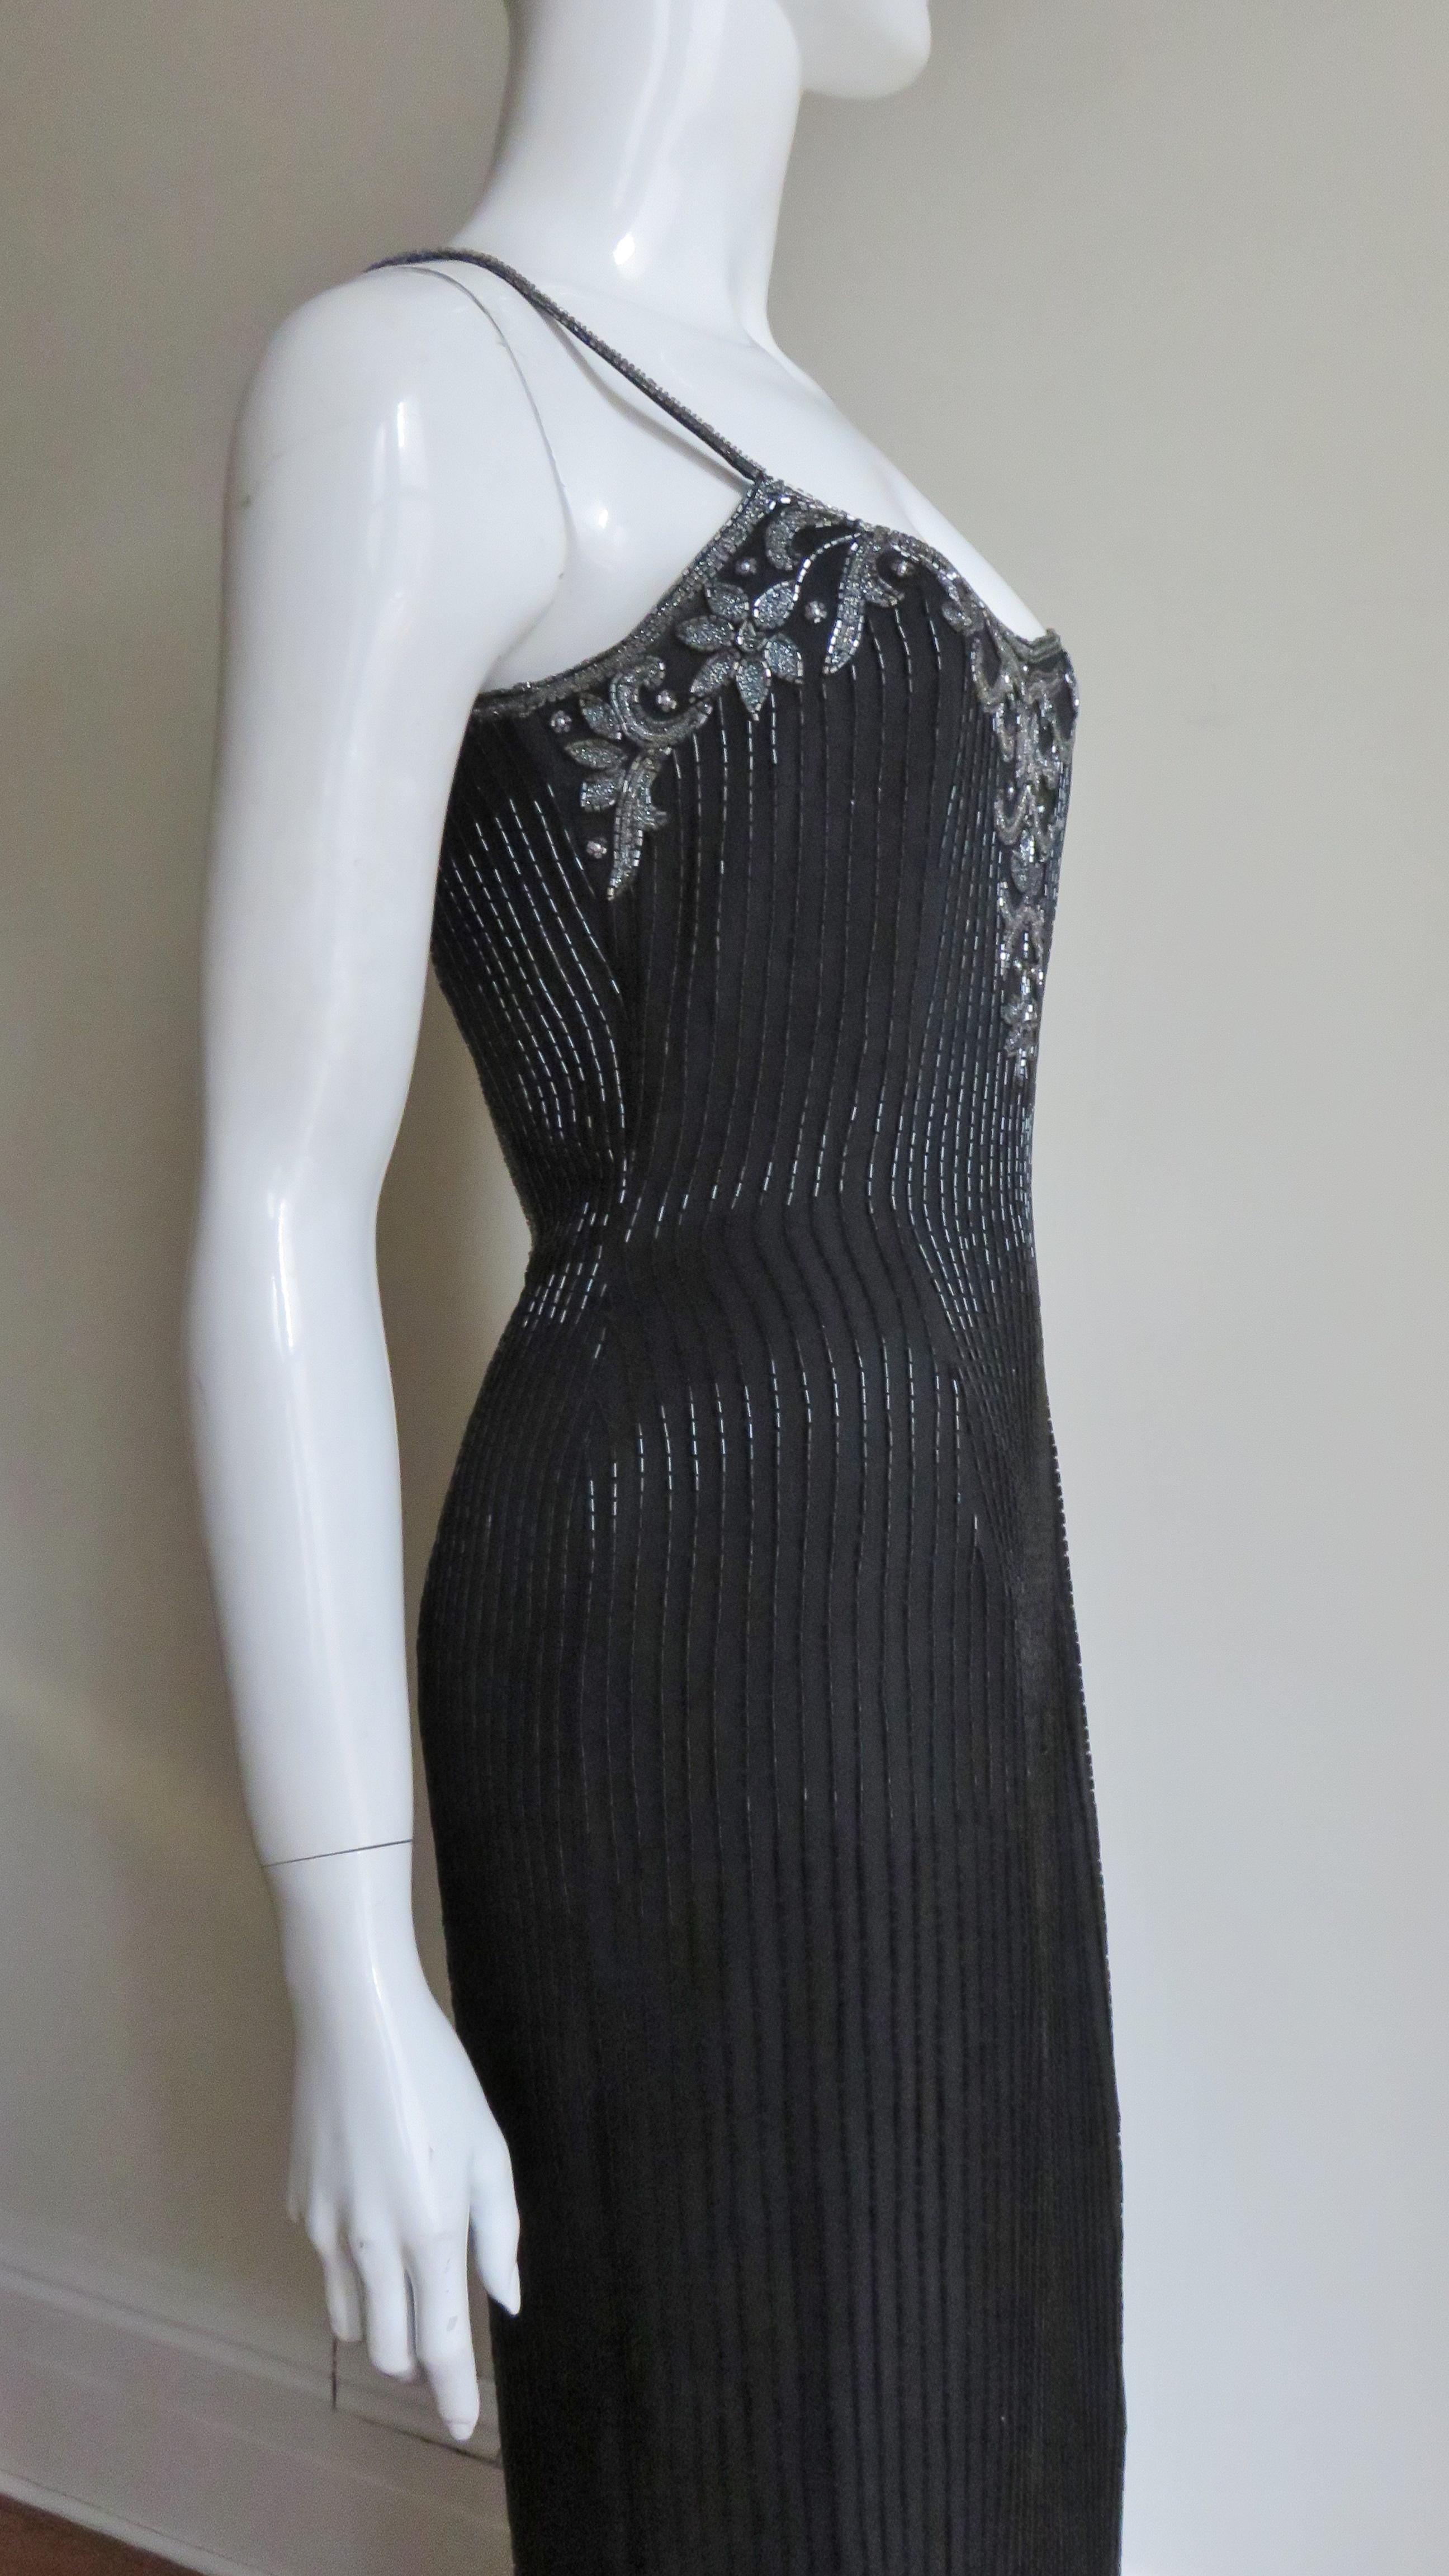 Sonia Rykiel Silk Beaded Gown with Elaborate Sheer Back 1990s For Sale 1